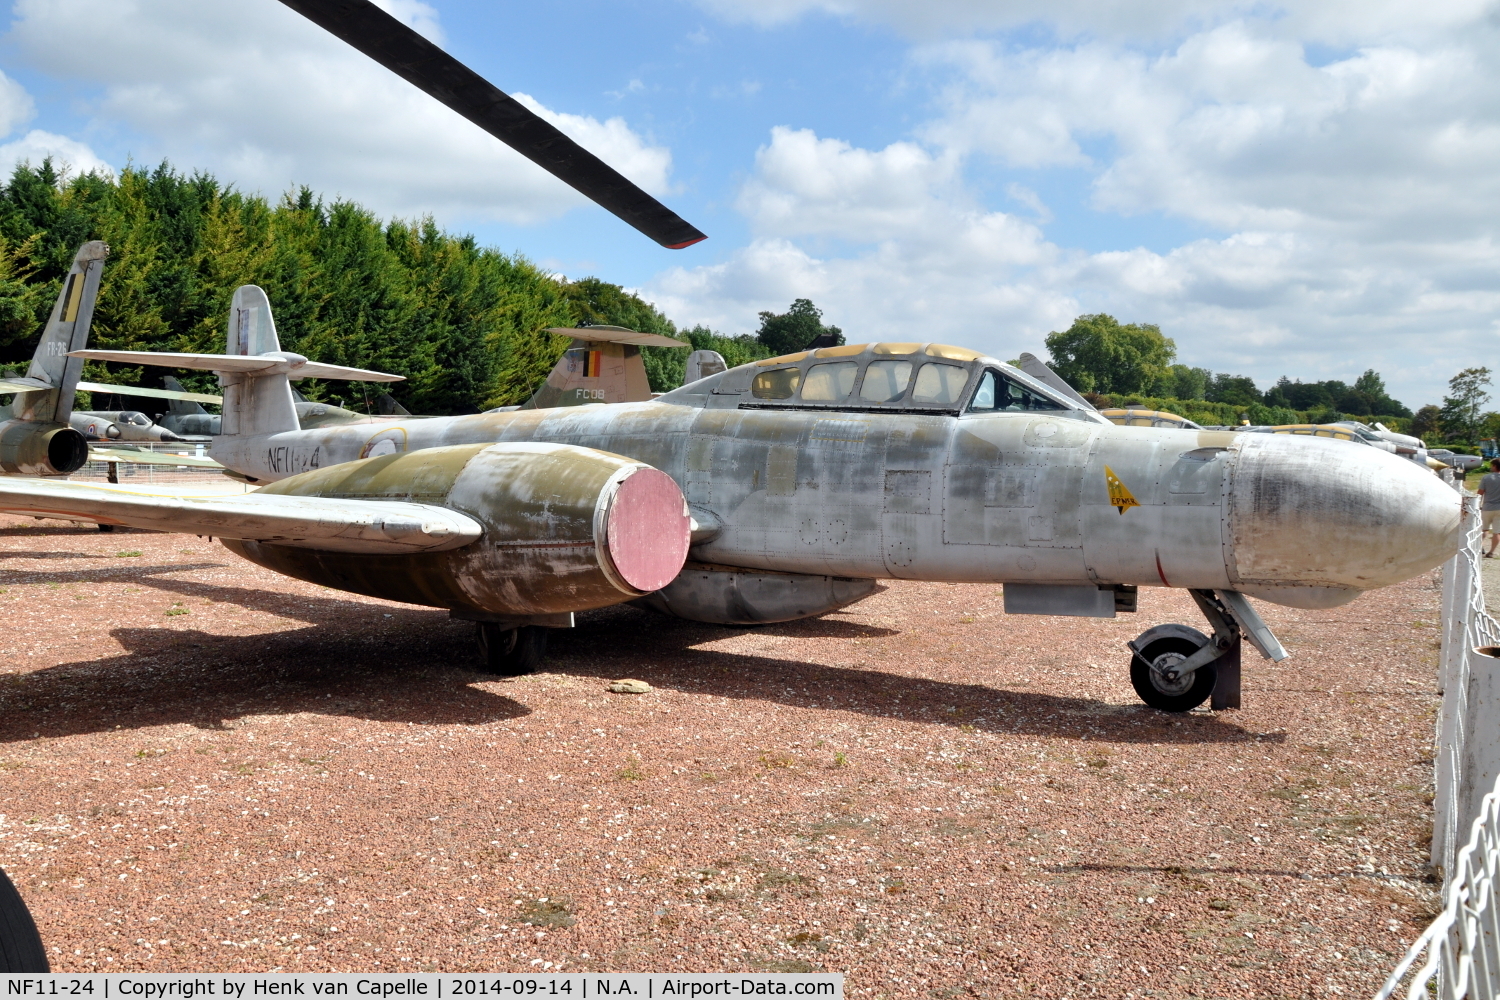 NF11-24, Gloster Meteor NF.11 C/N Not found NF11-24, French Air Force Gloster Meteor nightfighter at the Chateau de Savigny aircraft museum.